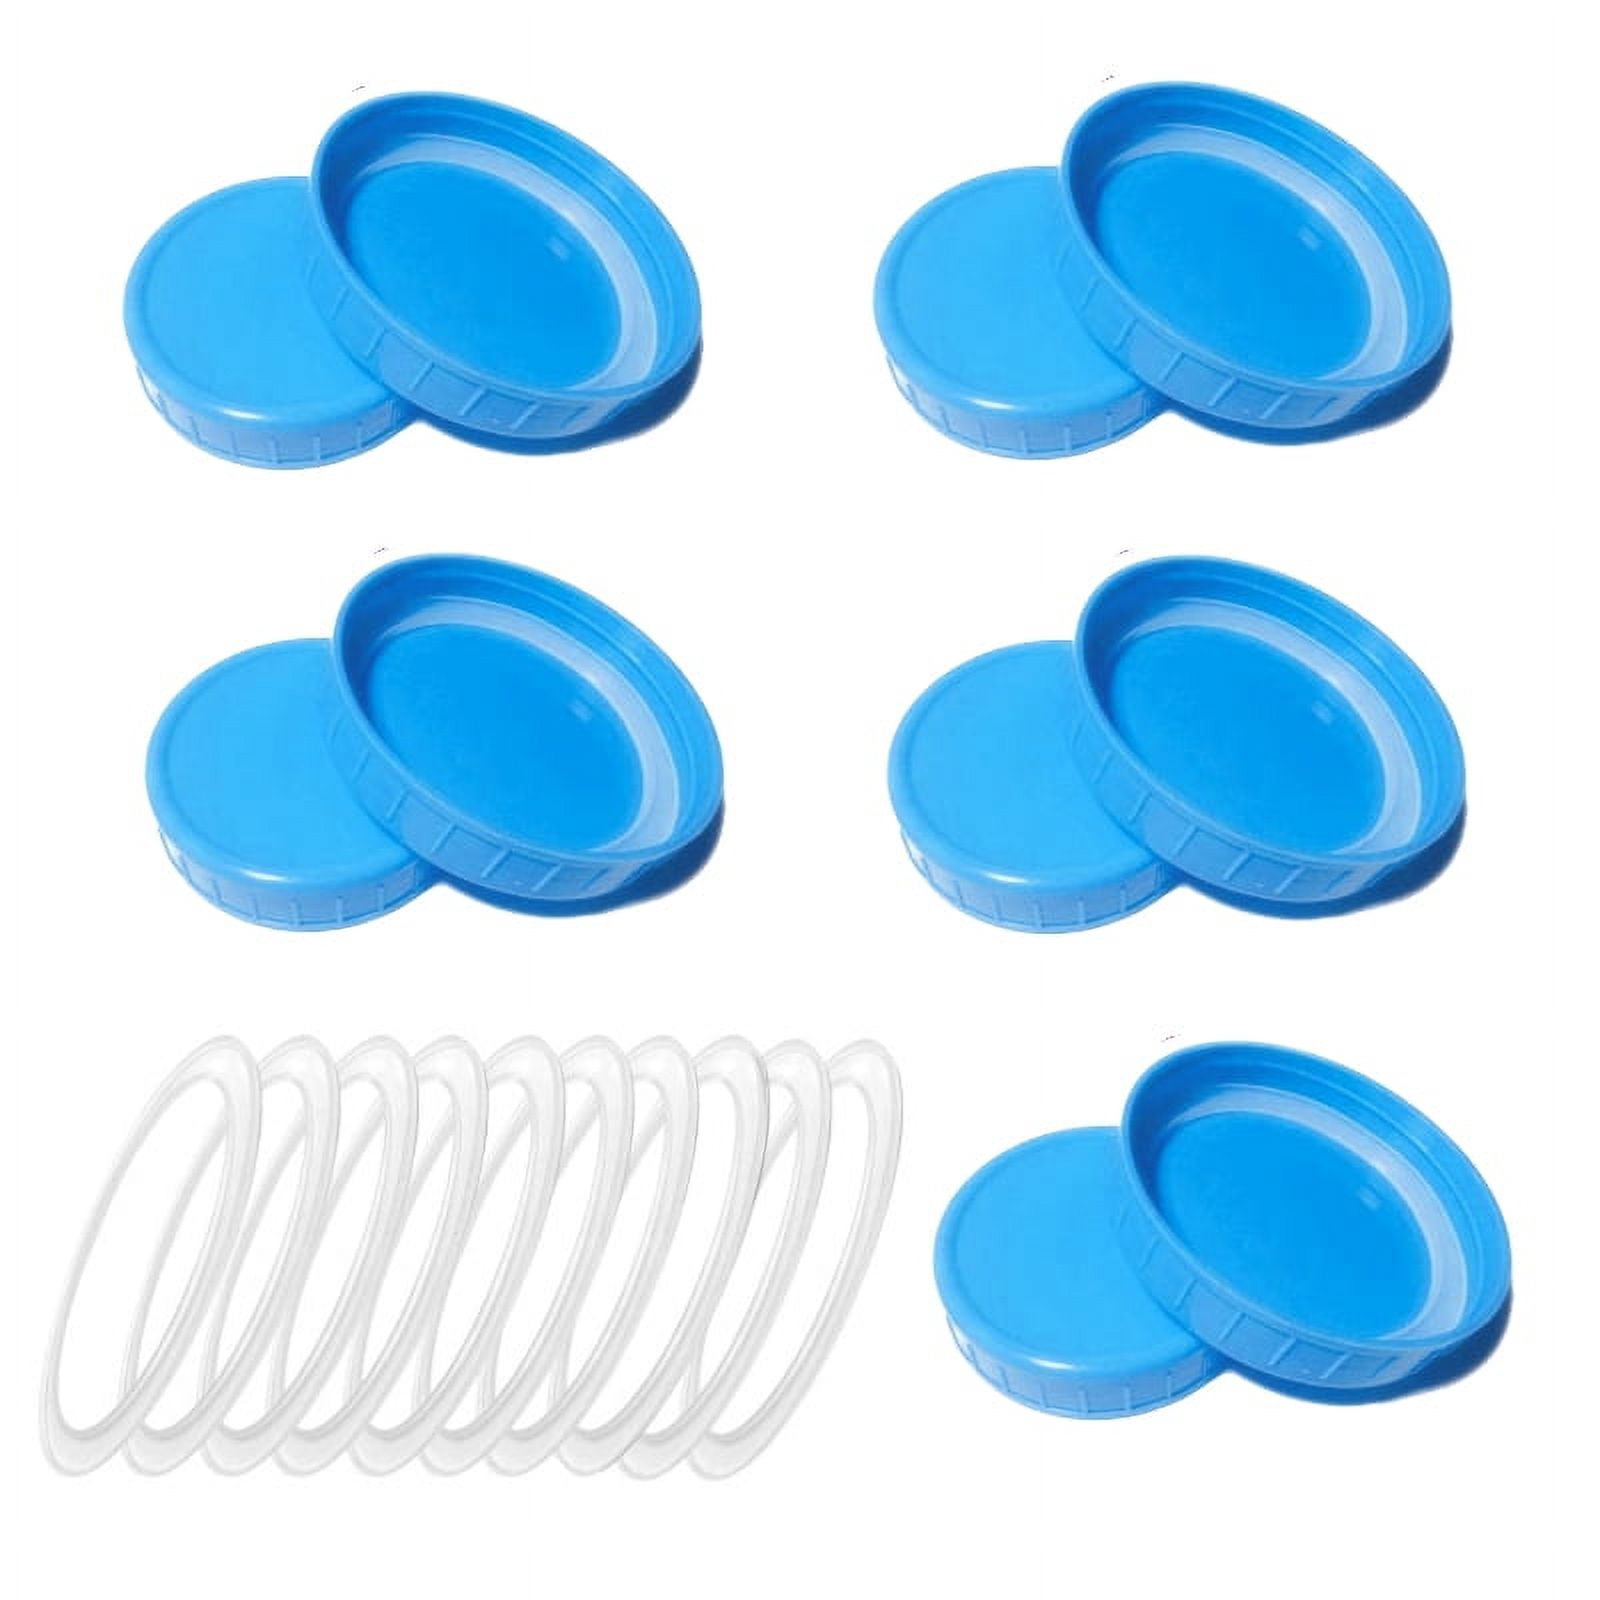 Famure 10pcs Colored Plastic Mason Jar Lids Recyclable Storage Caps With Silicone Sealing Rings